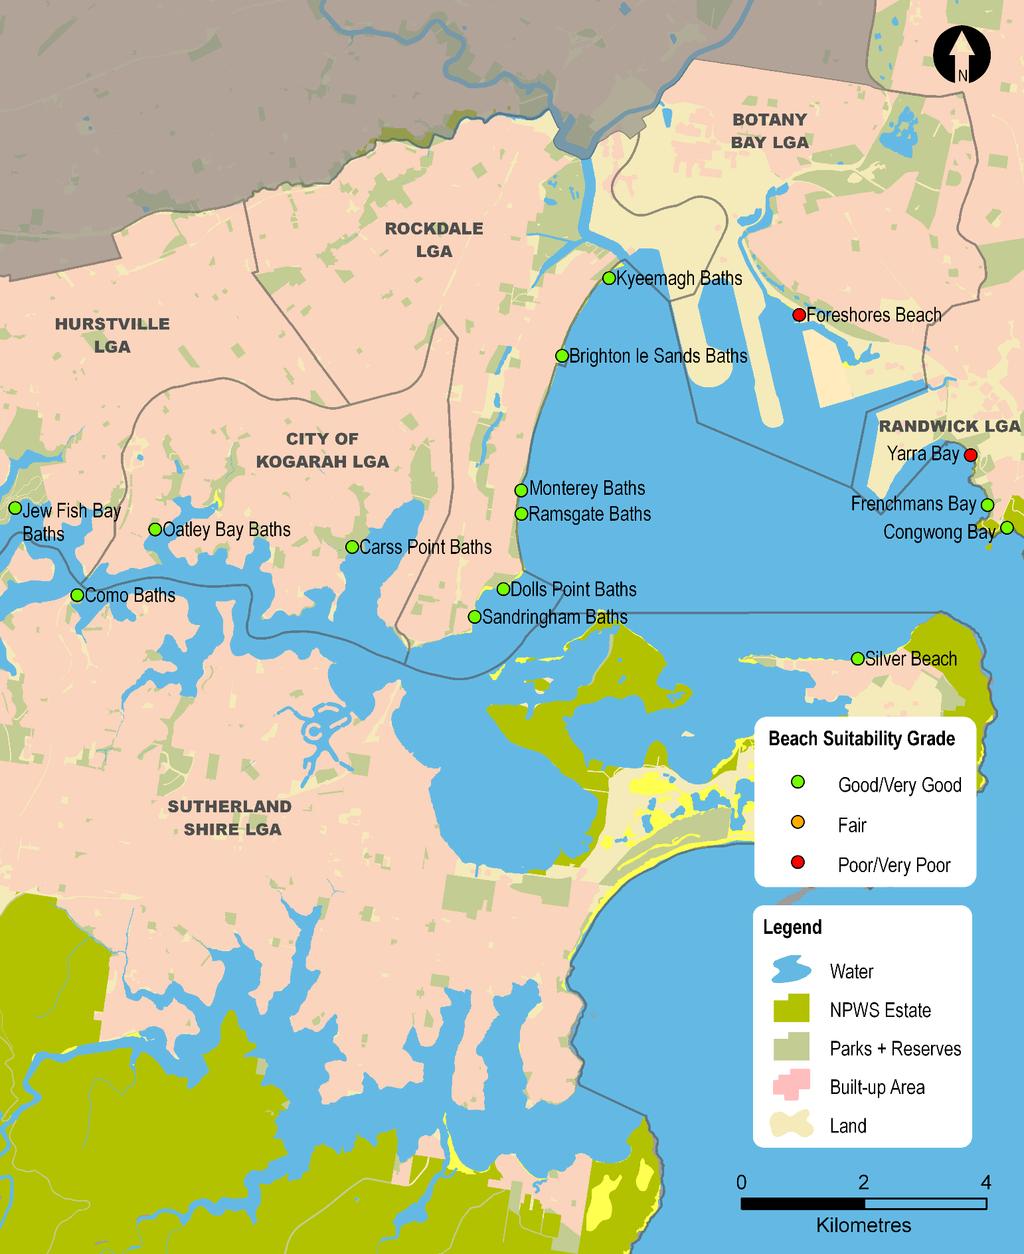 Sydney Region Southern Sydney (Sutherland and Southern Harbours) Sampling sites and Beach